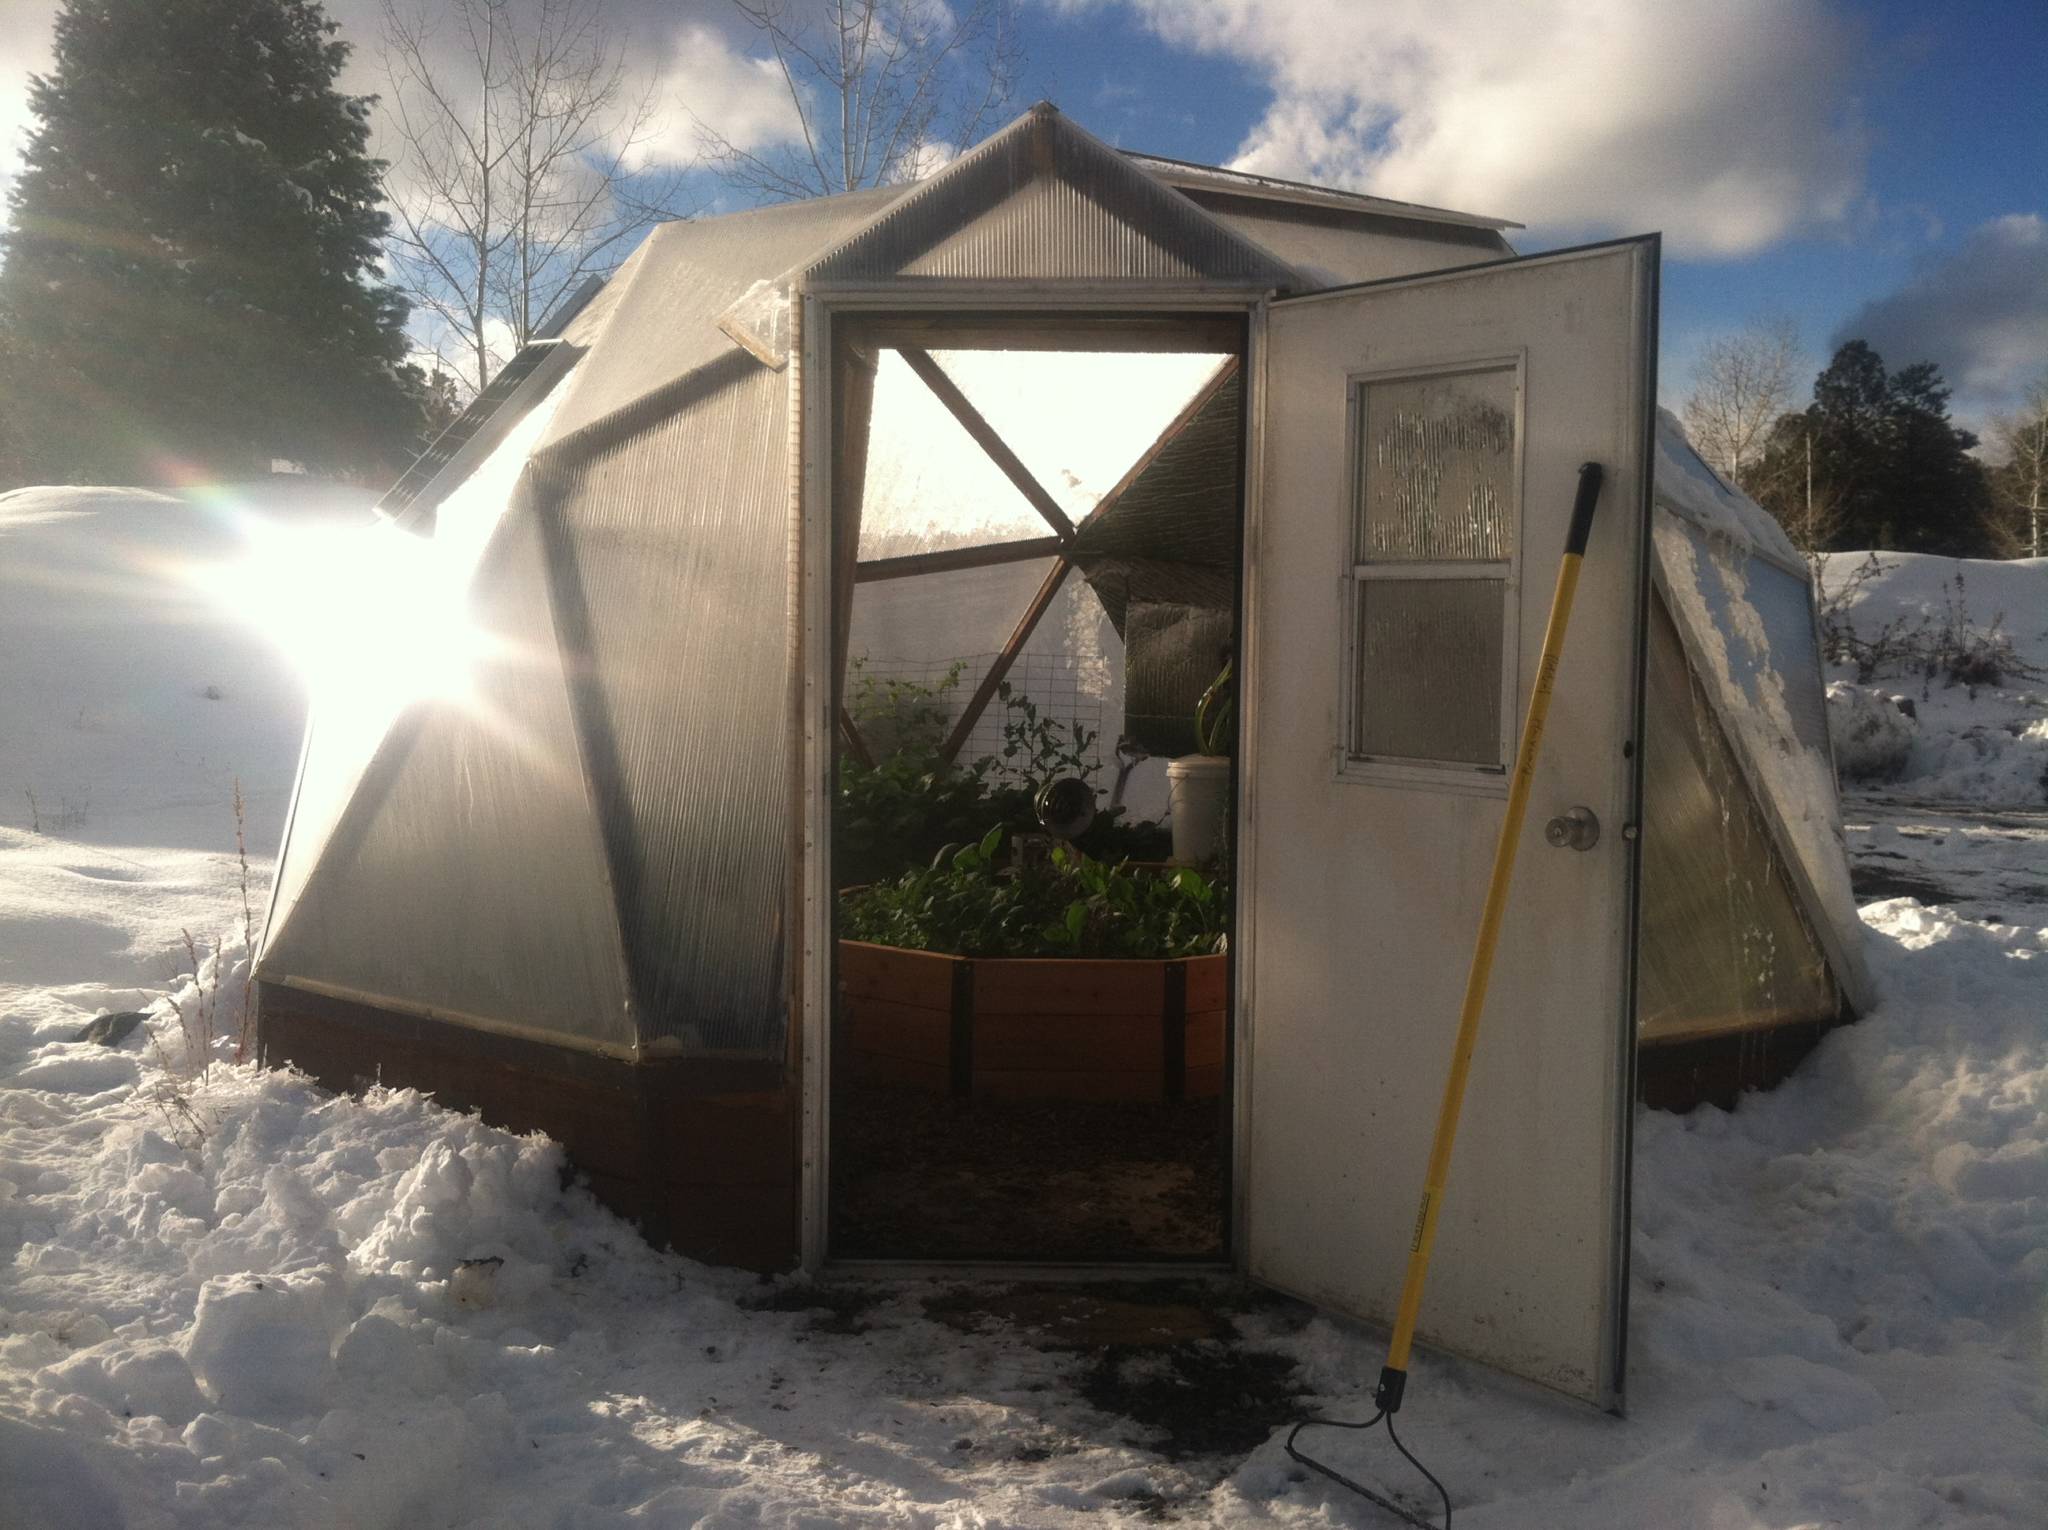 15' growing Dome greenhouse in the snow